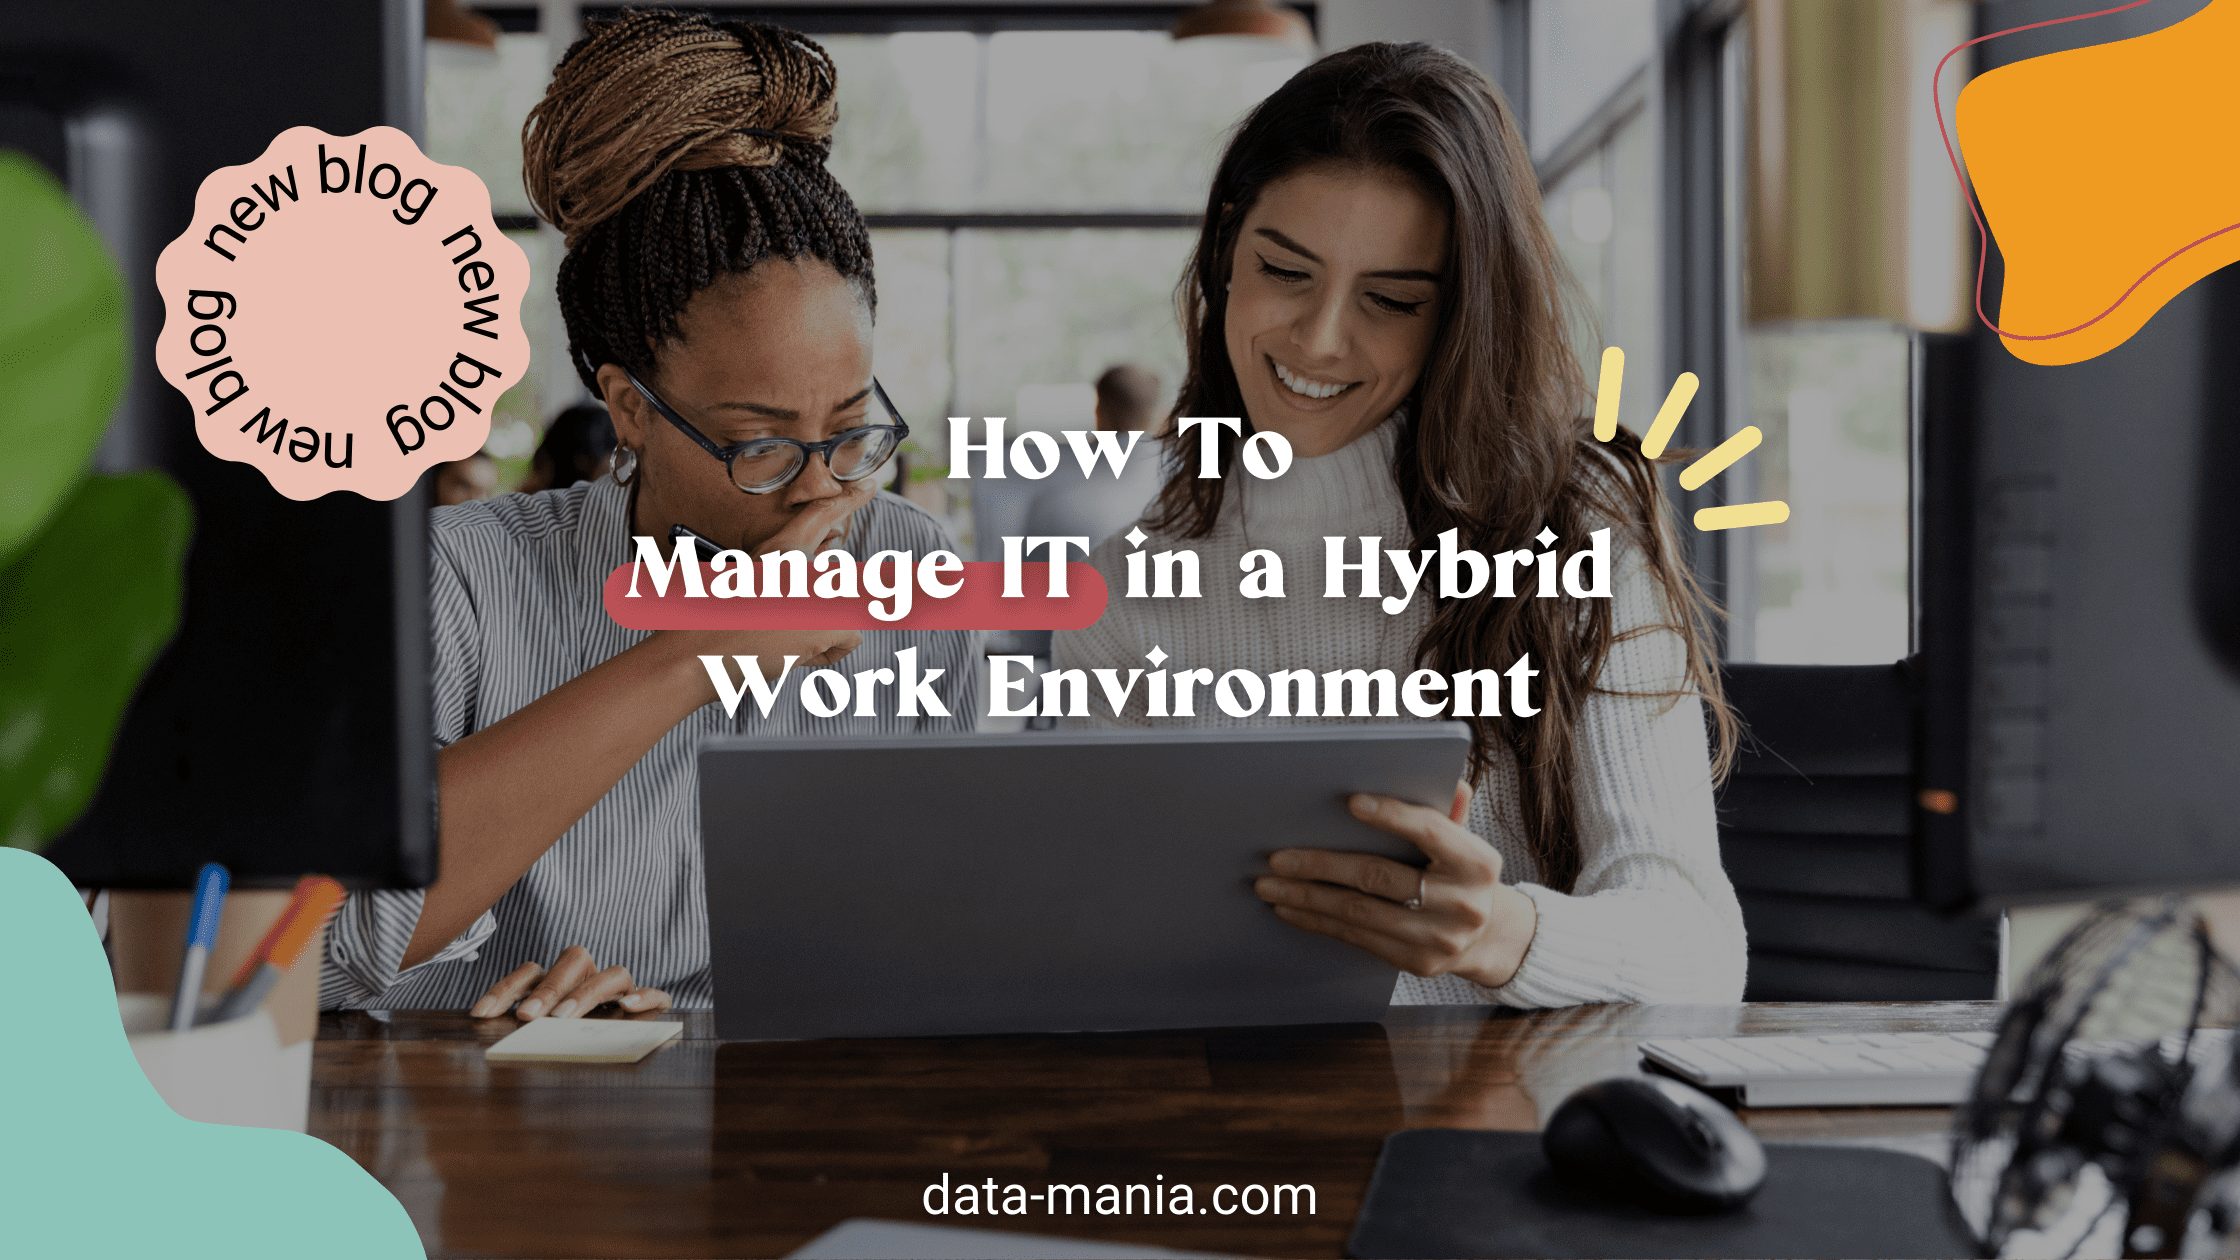 How To Manage IT in a Hybrid Work Environment